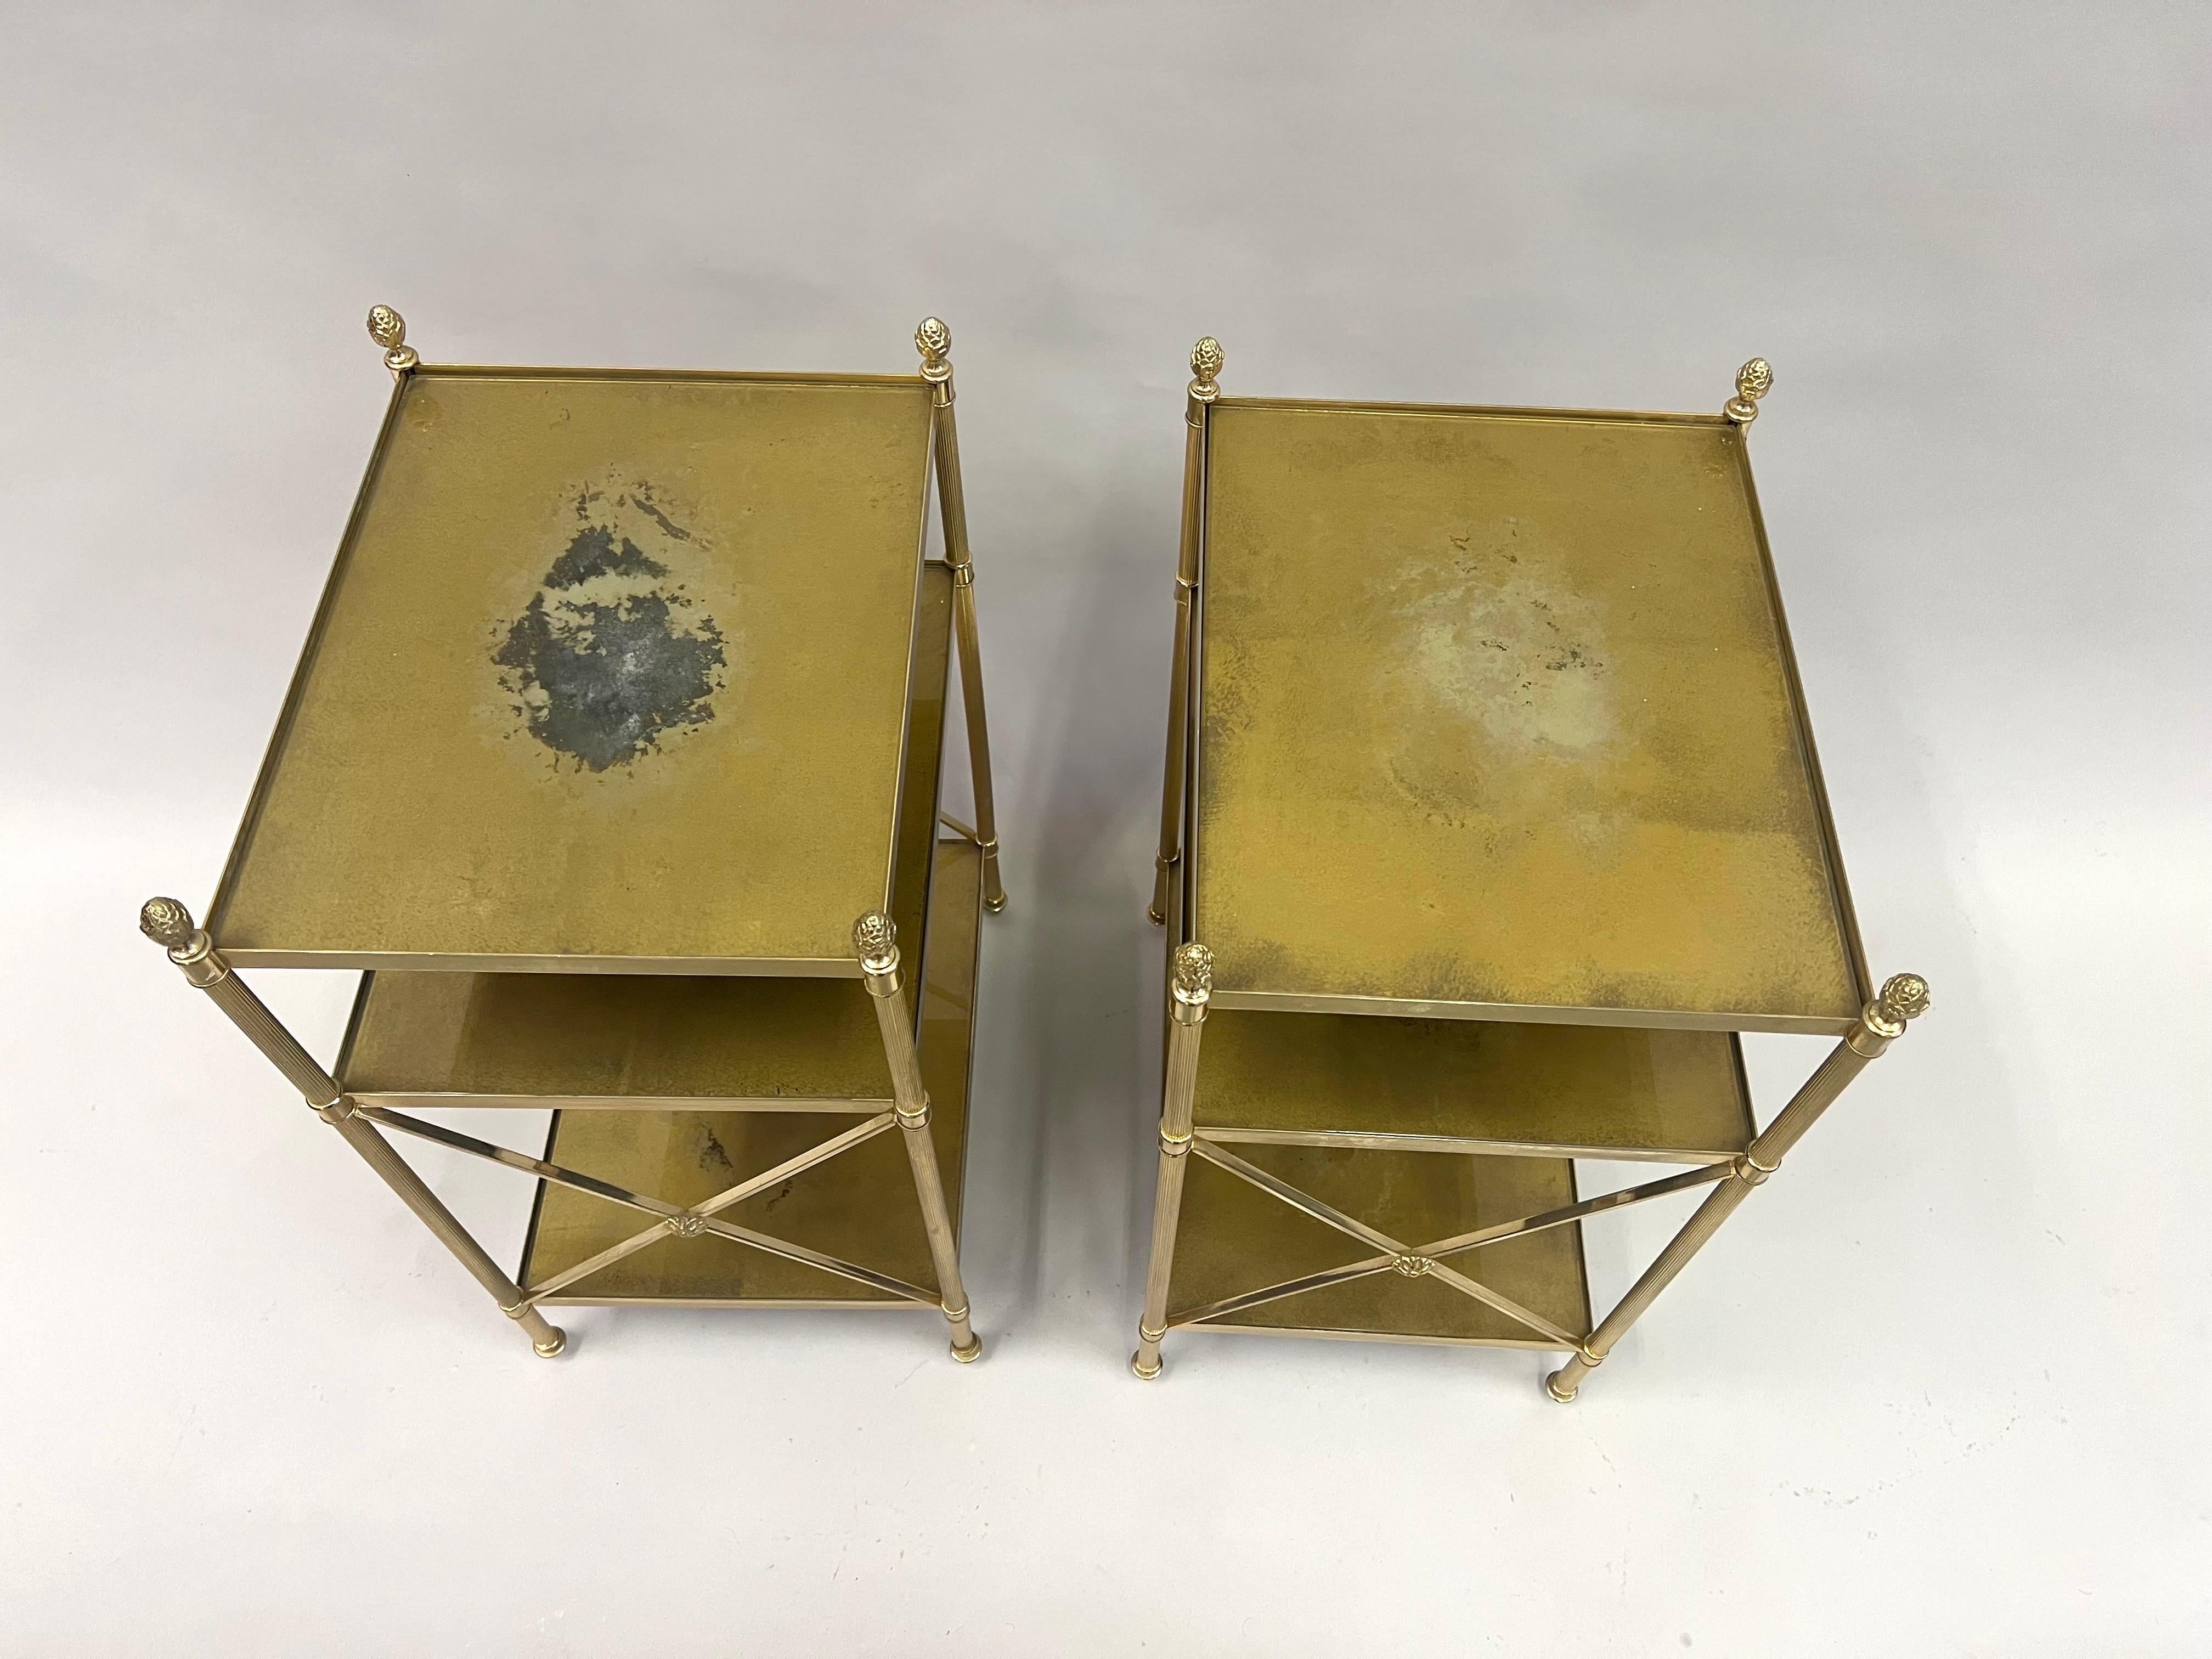 Pair of French Modern Neoclassical Brass & Verre Eglomisse 3 Tier Side Tables In Good Condition For Sale In New York, NY